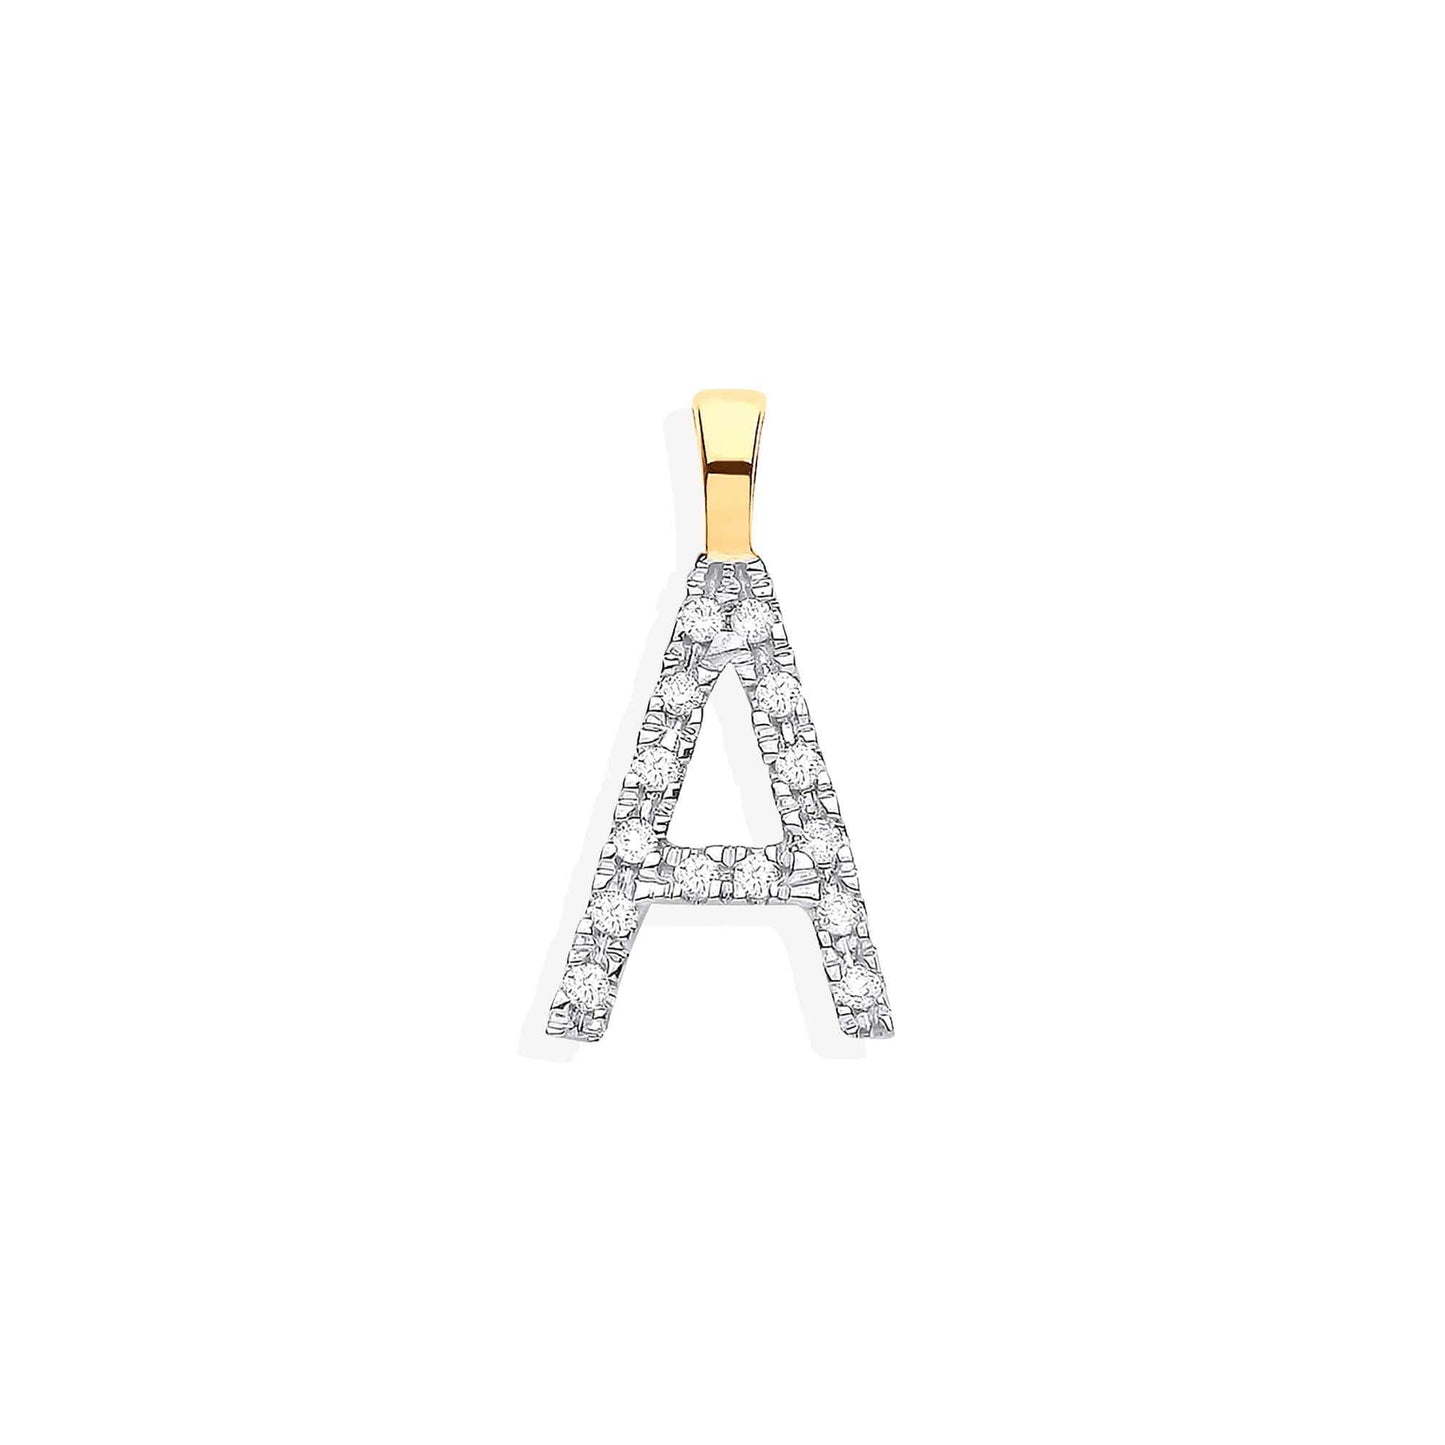 Diamonds set in a block A capital letter on yellow gold, with bale.